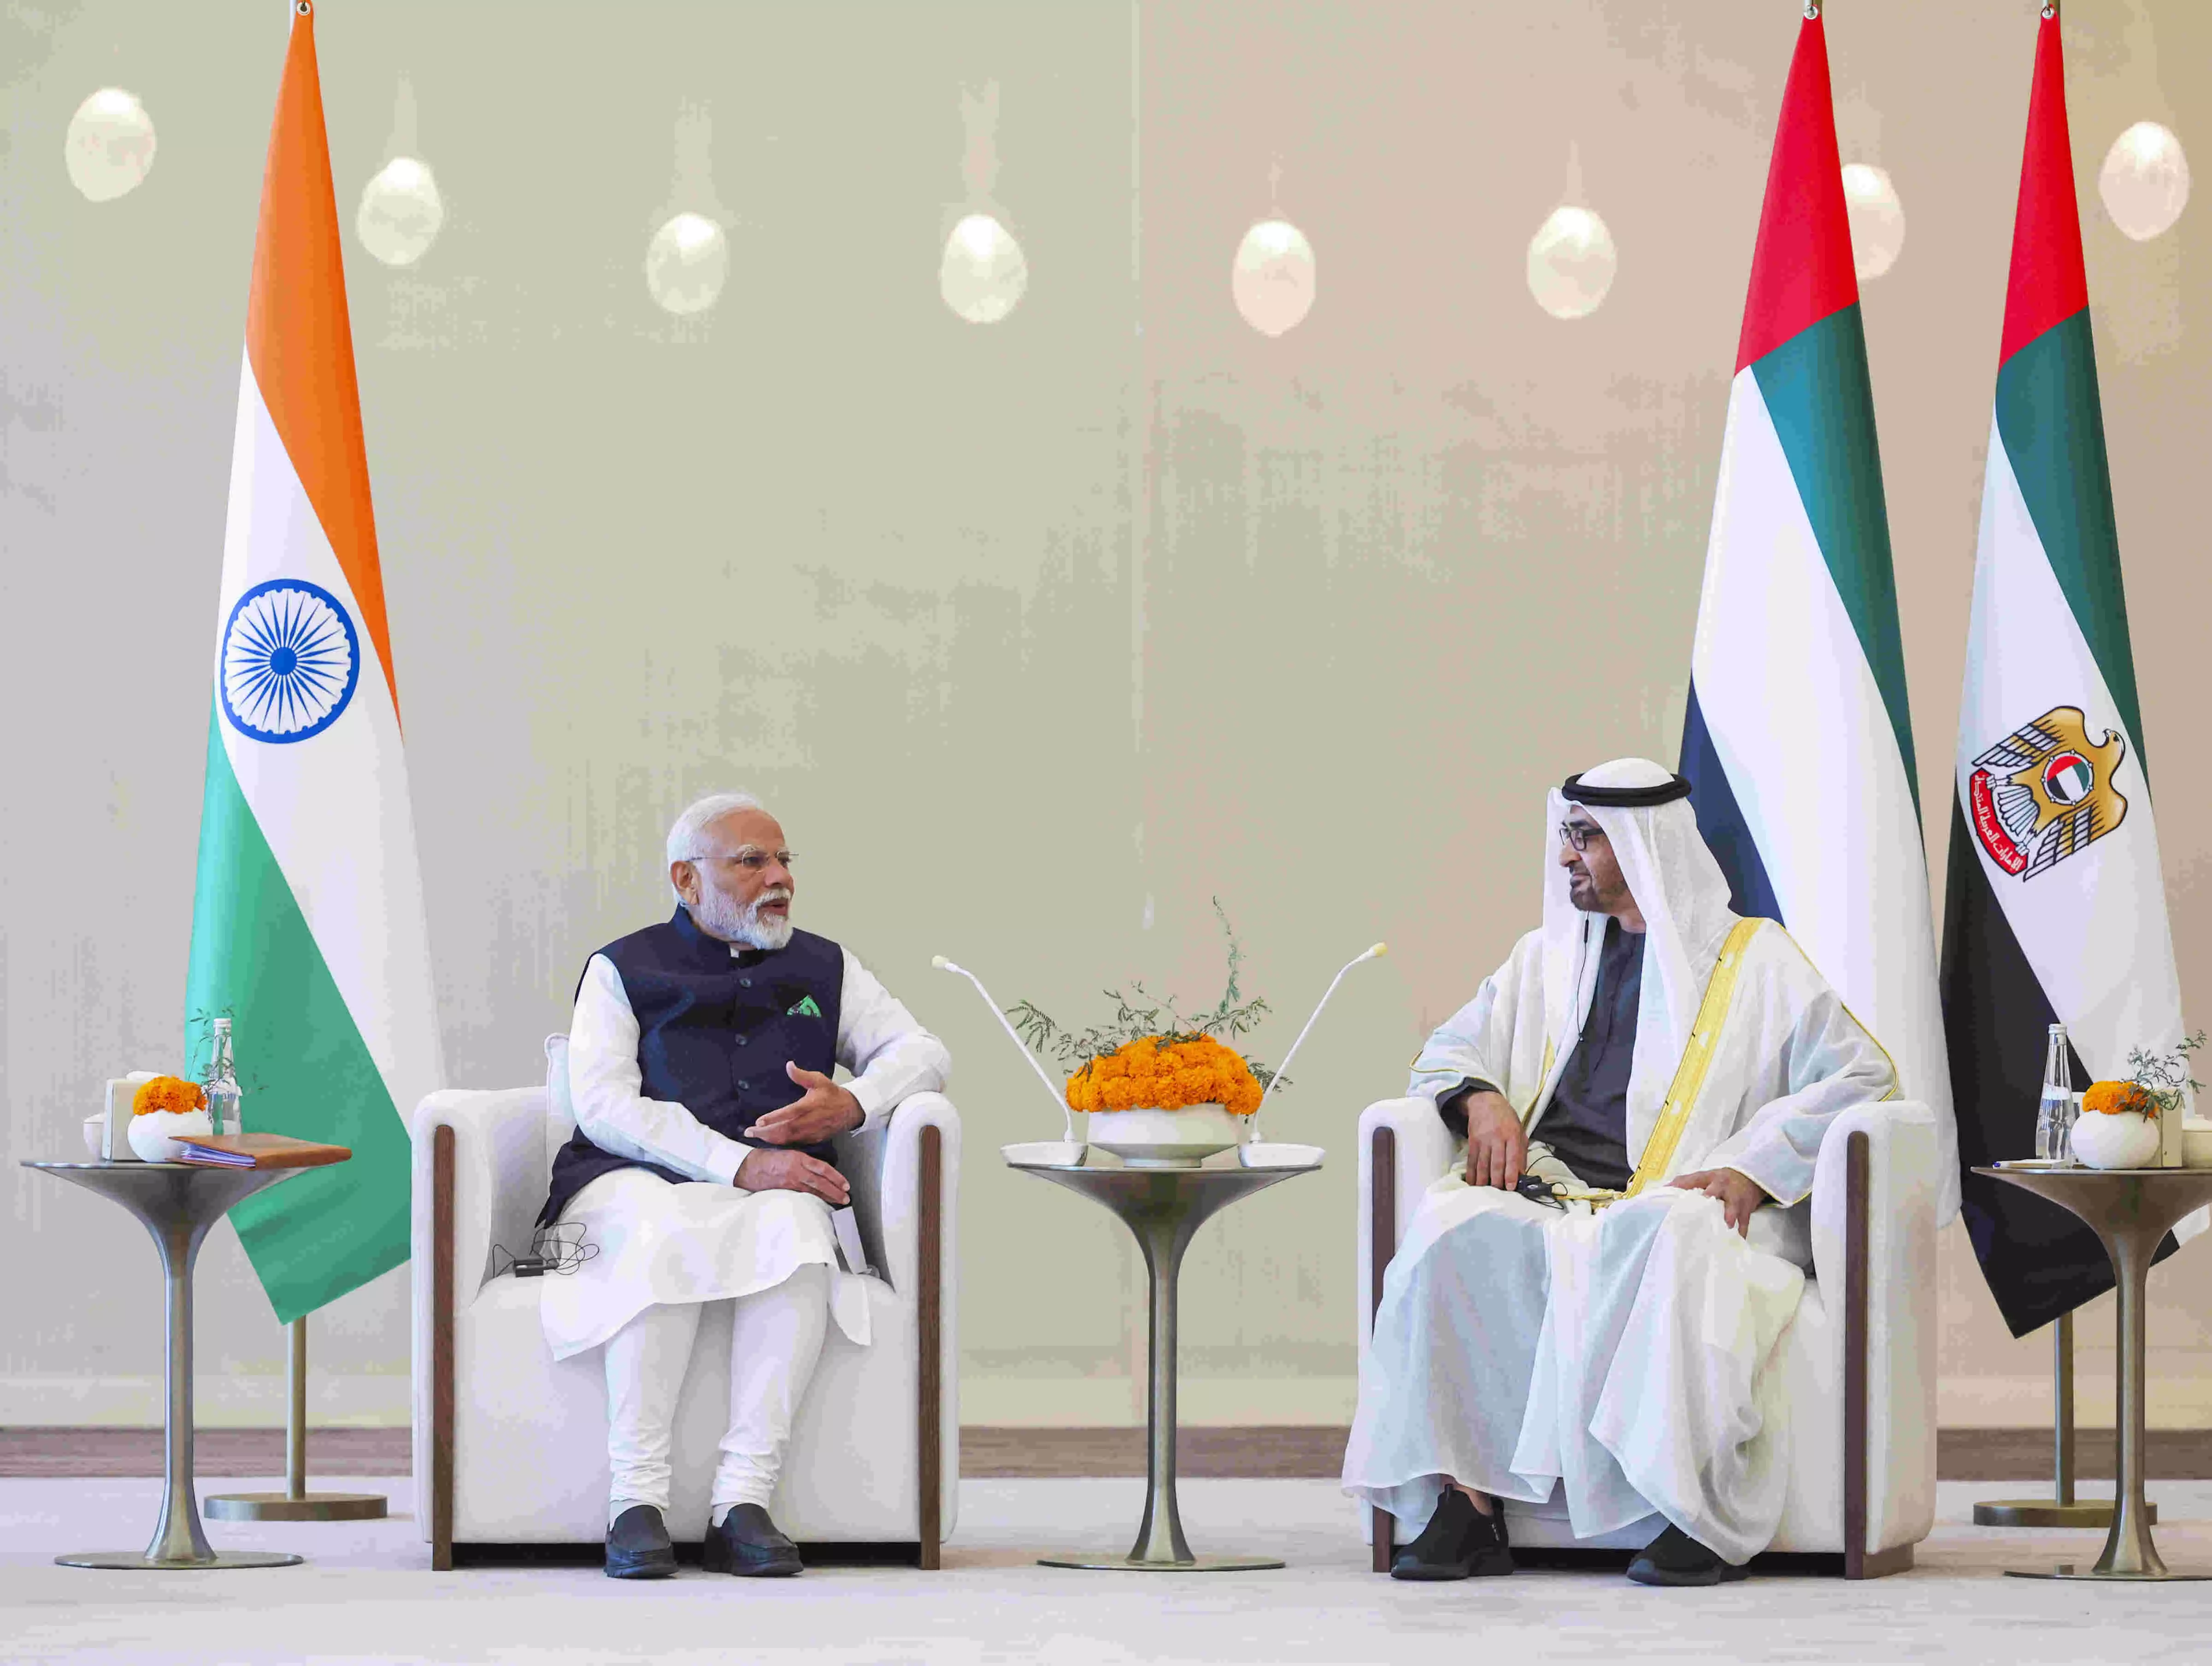 PM Modi thanks UAE President for support in construction of Hindu temple in Abu Dhabi ahead of its inauguration